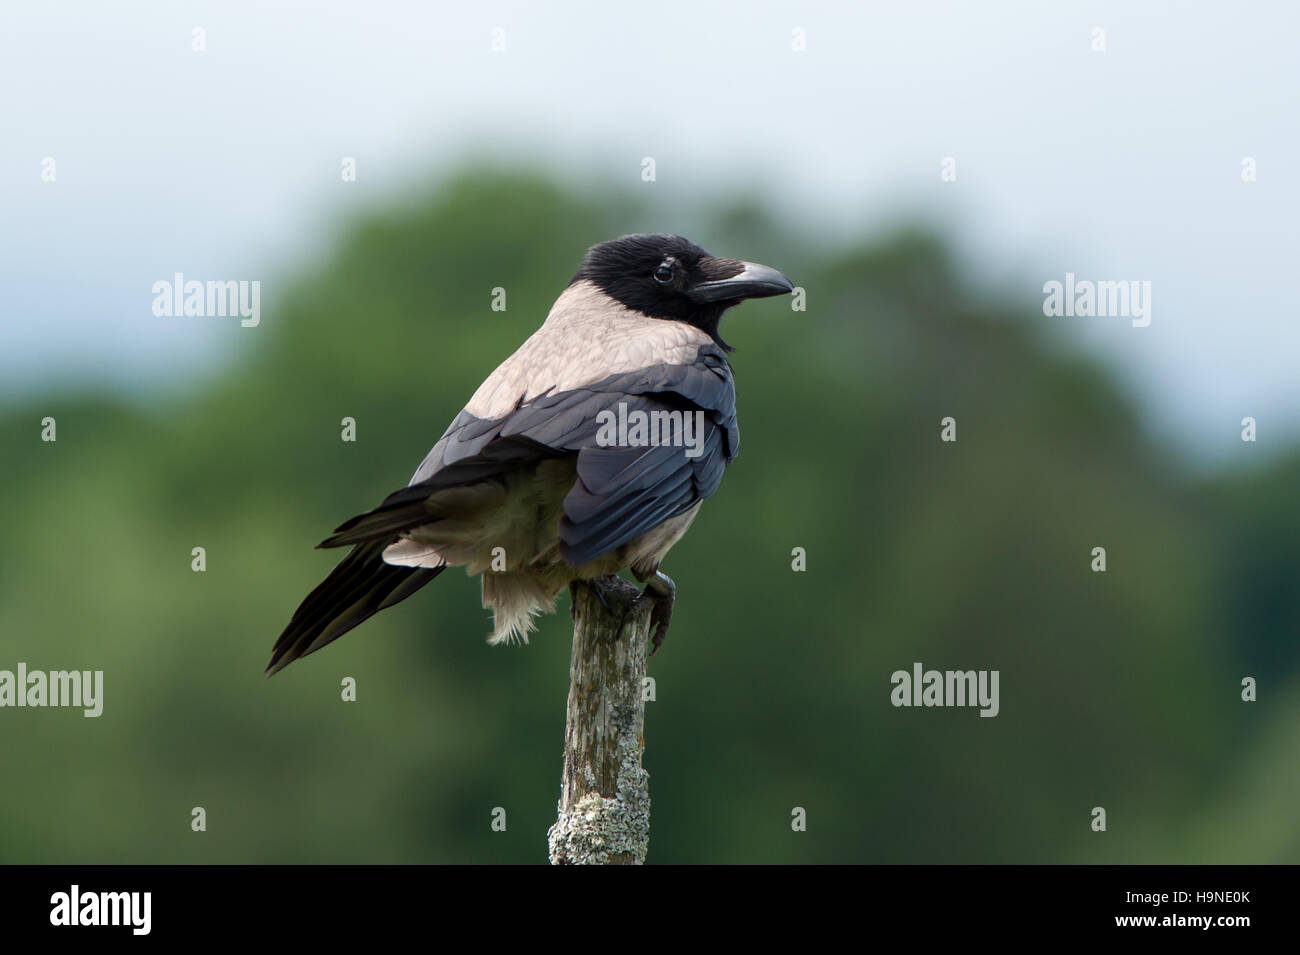 The Hooded Crow (Corvus cornix) or Grey Crow among many names is an ashy grey bird with black head, throat, wings, tail and thigh feathers, as well as Stock Photo